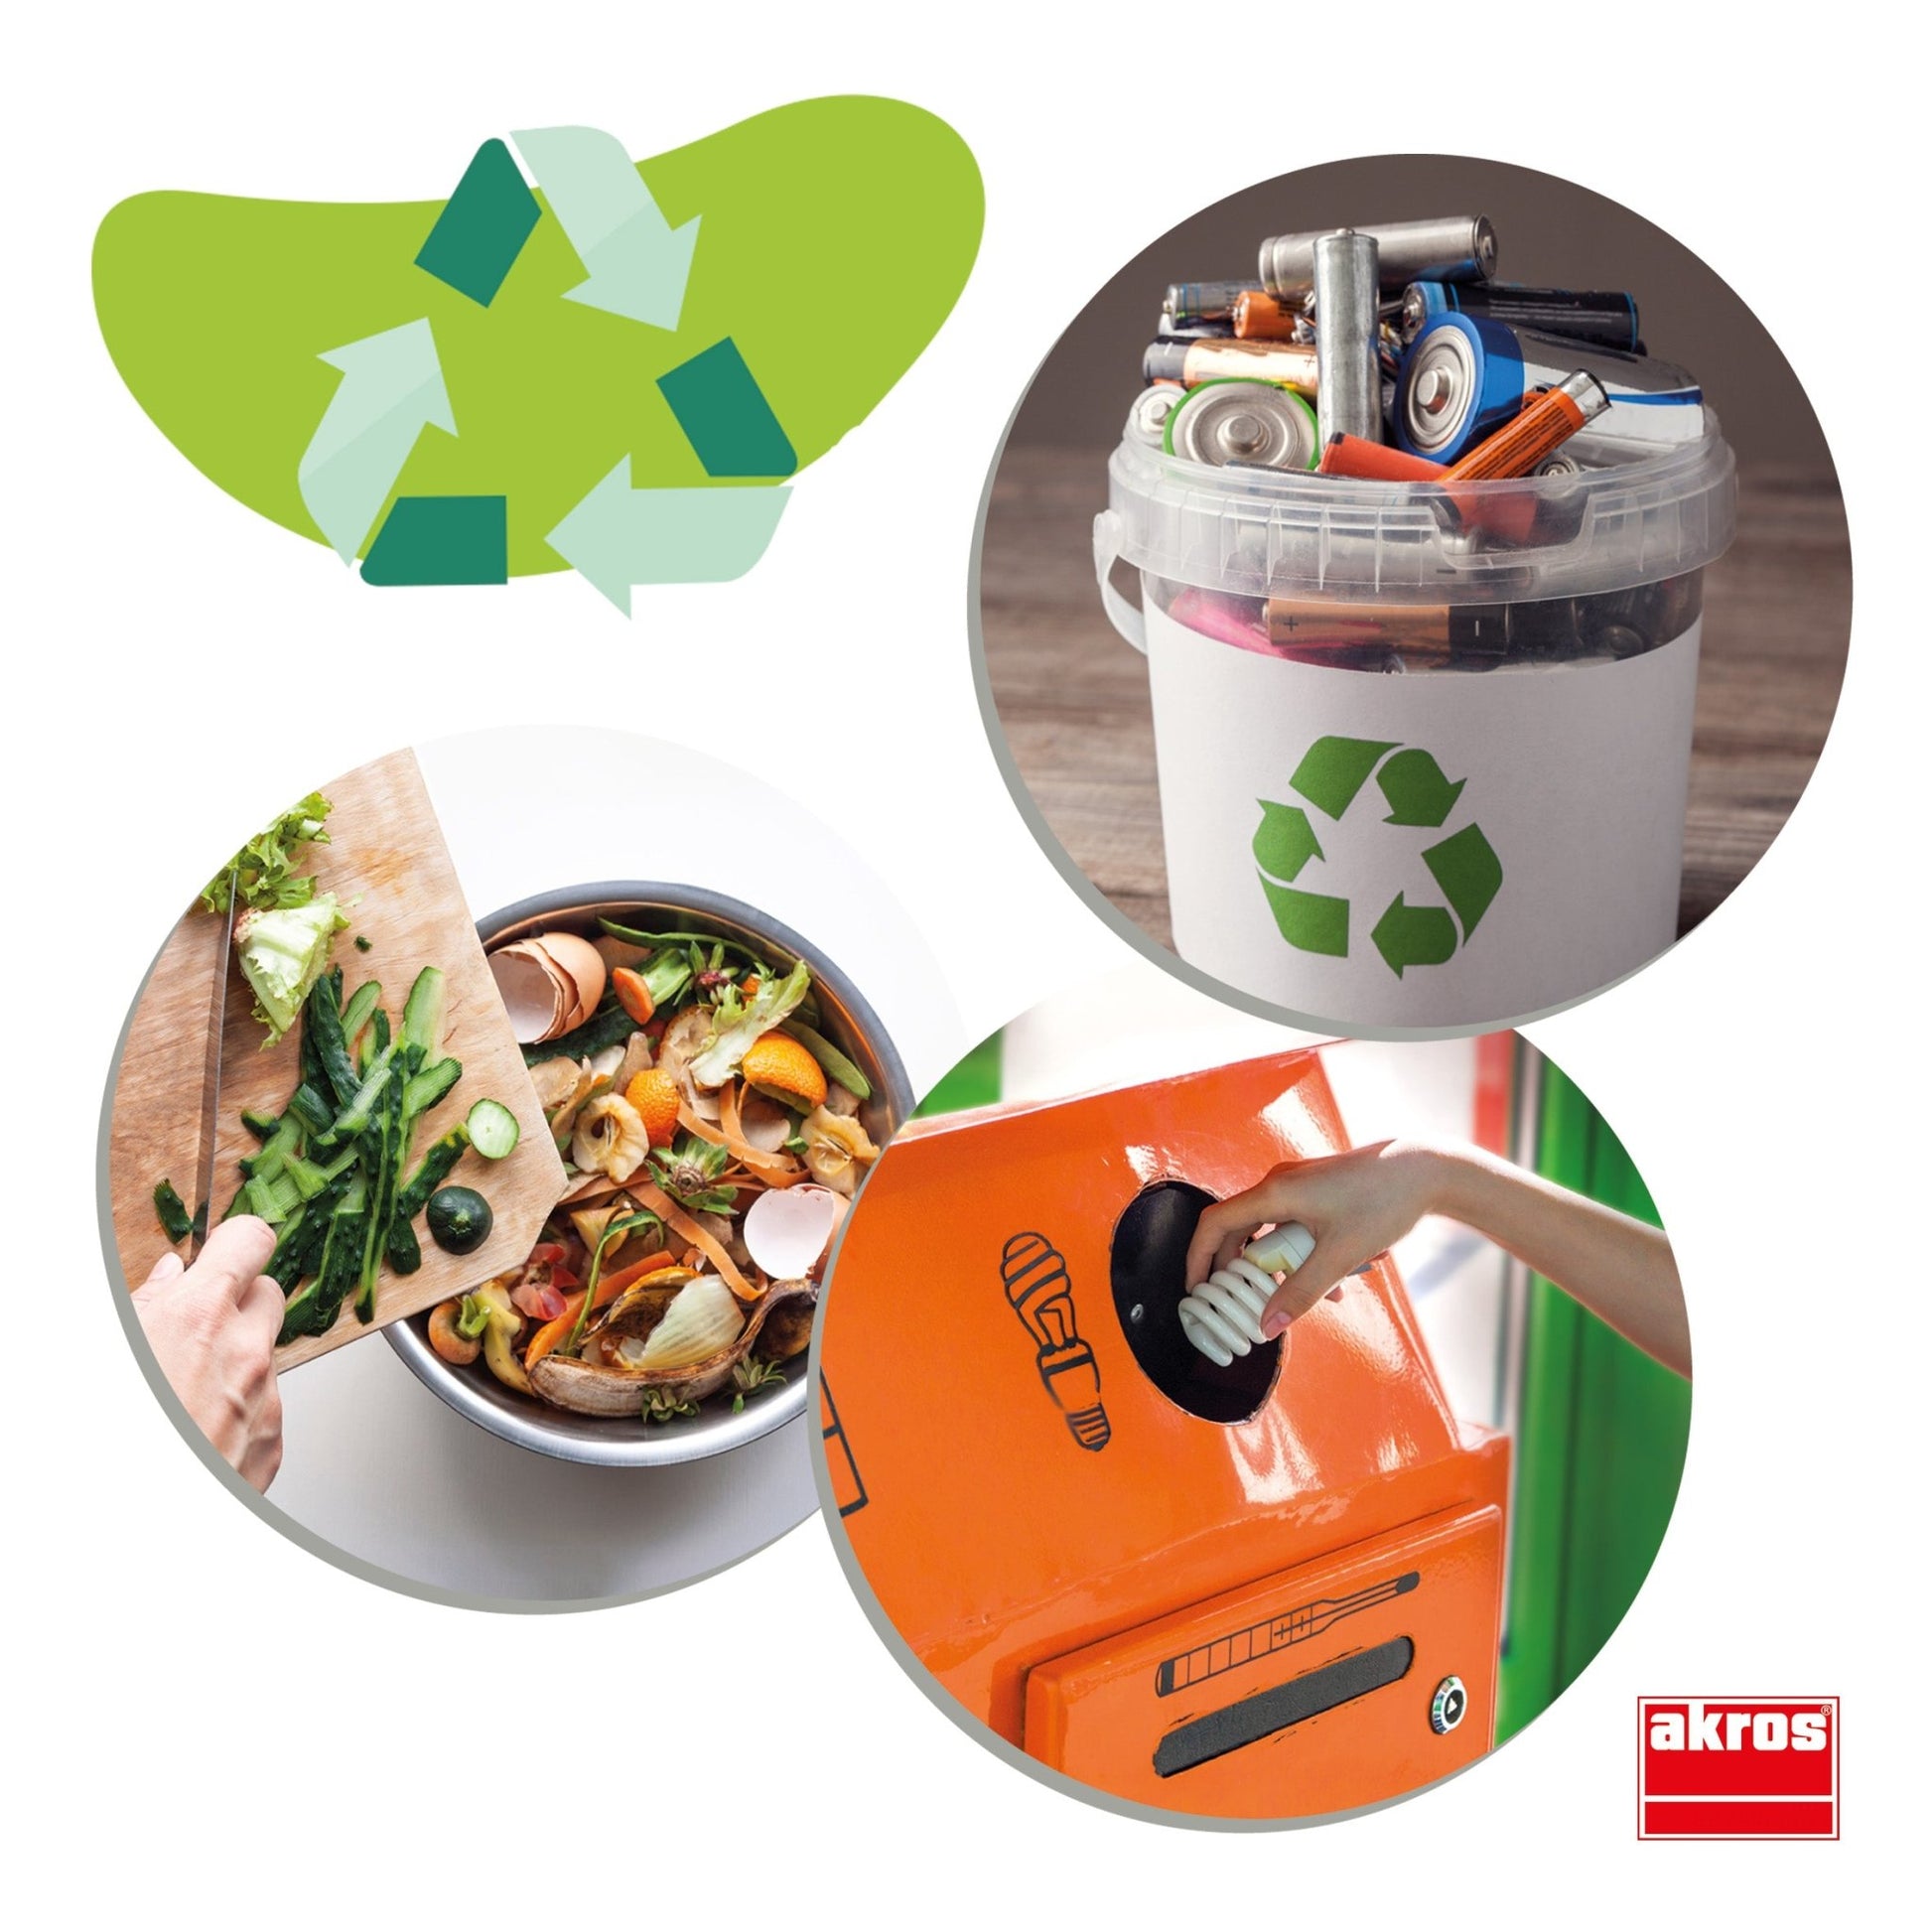 Akros - The 3 R: Reduce, Reuse And Recycle - Playlaan